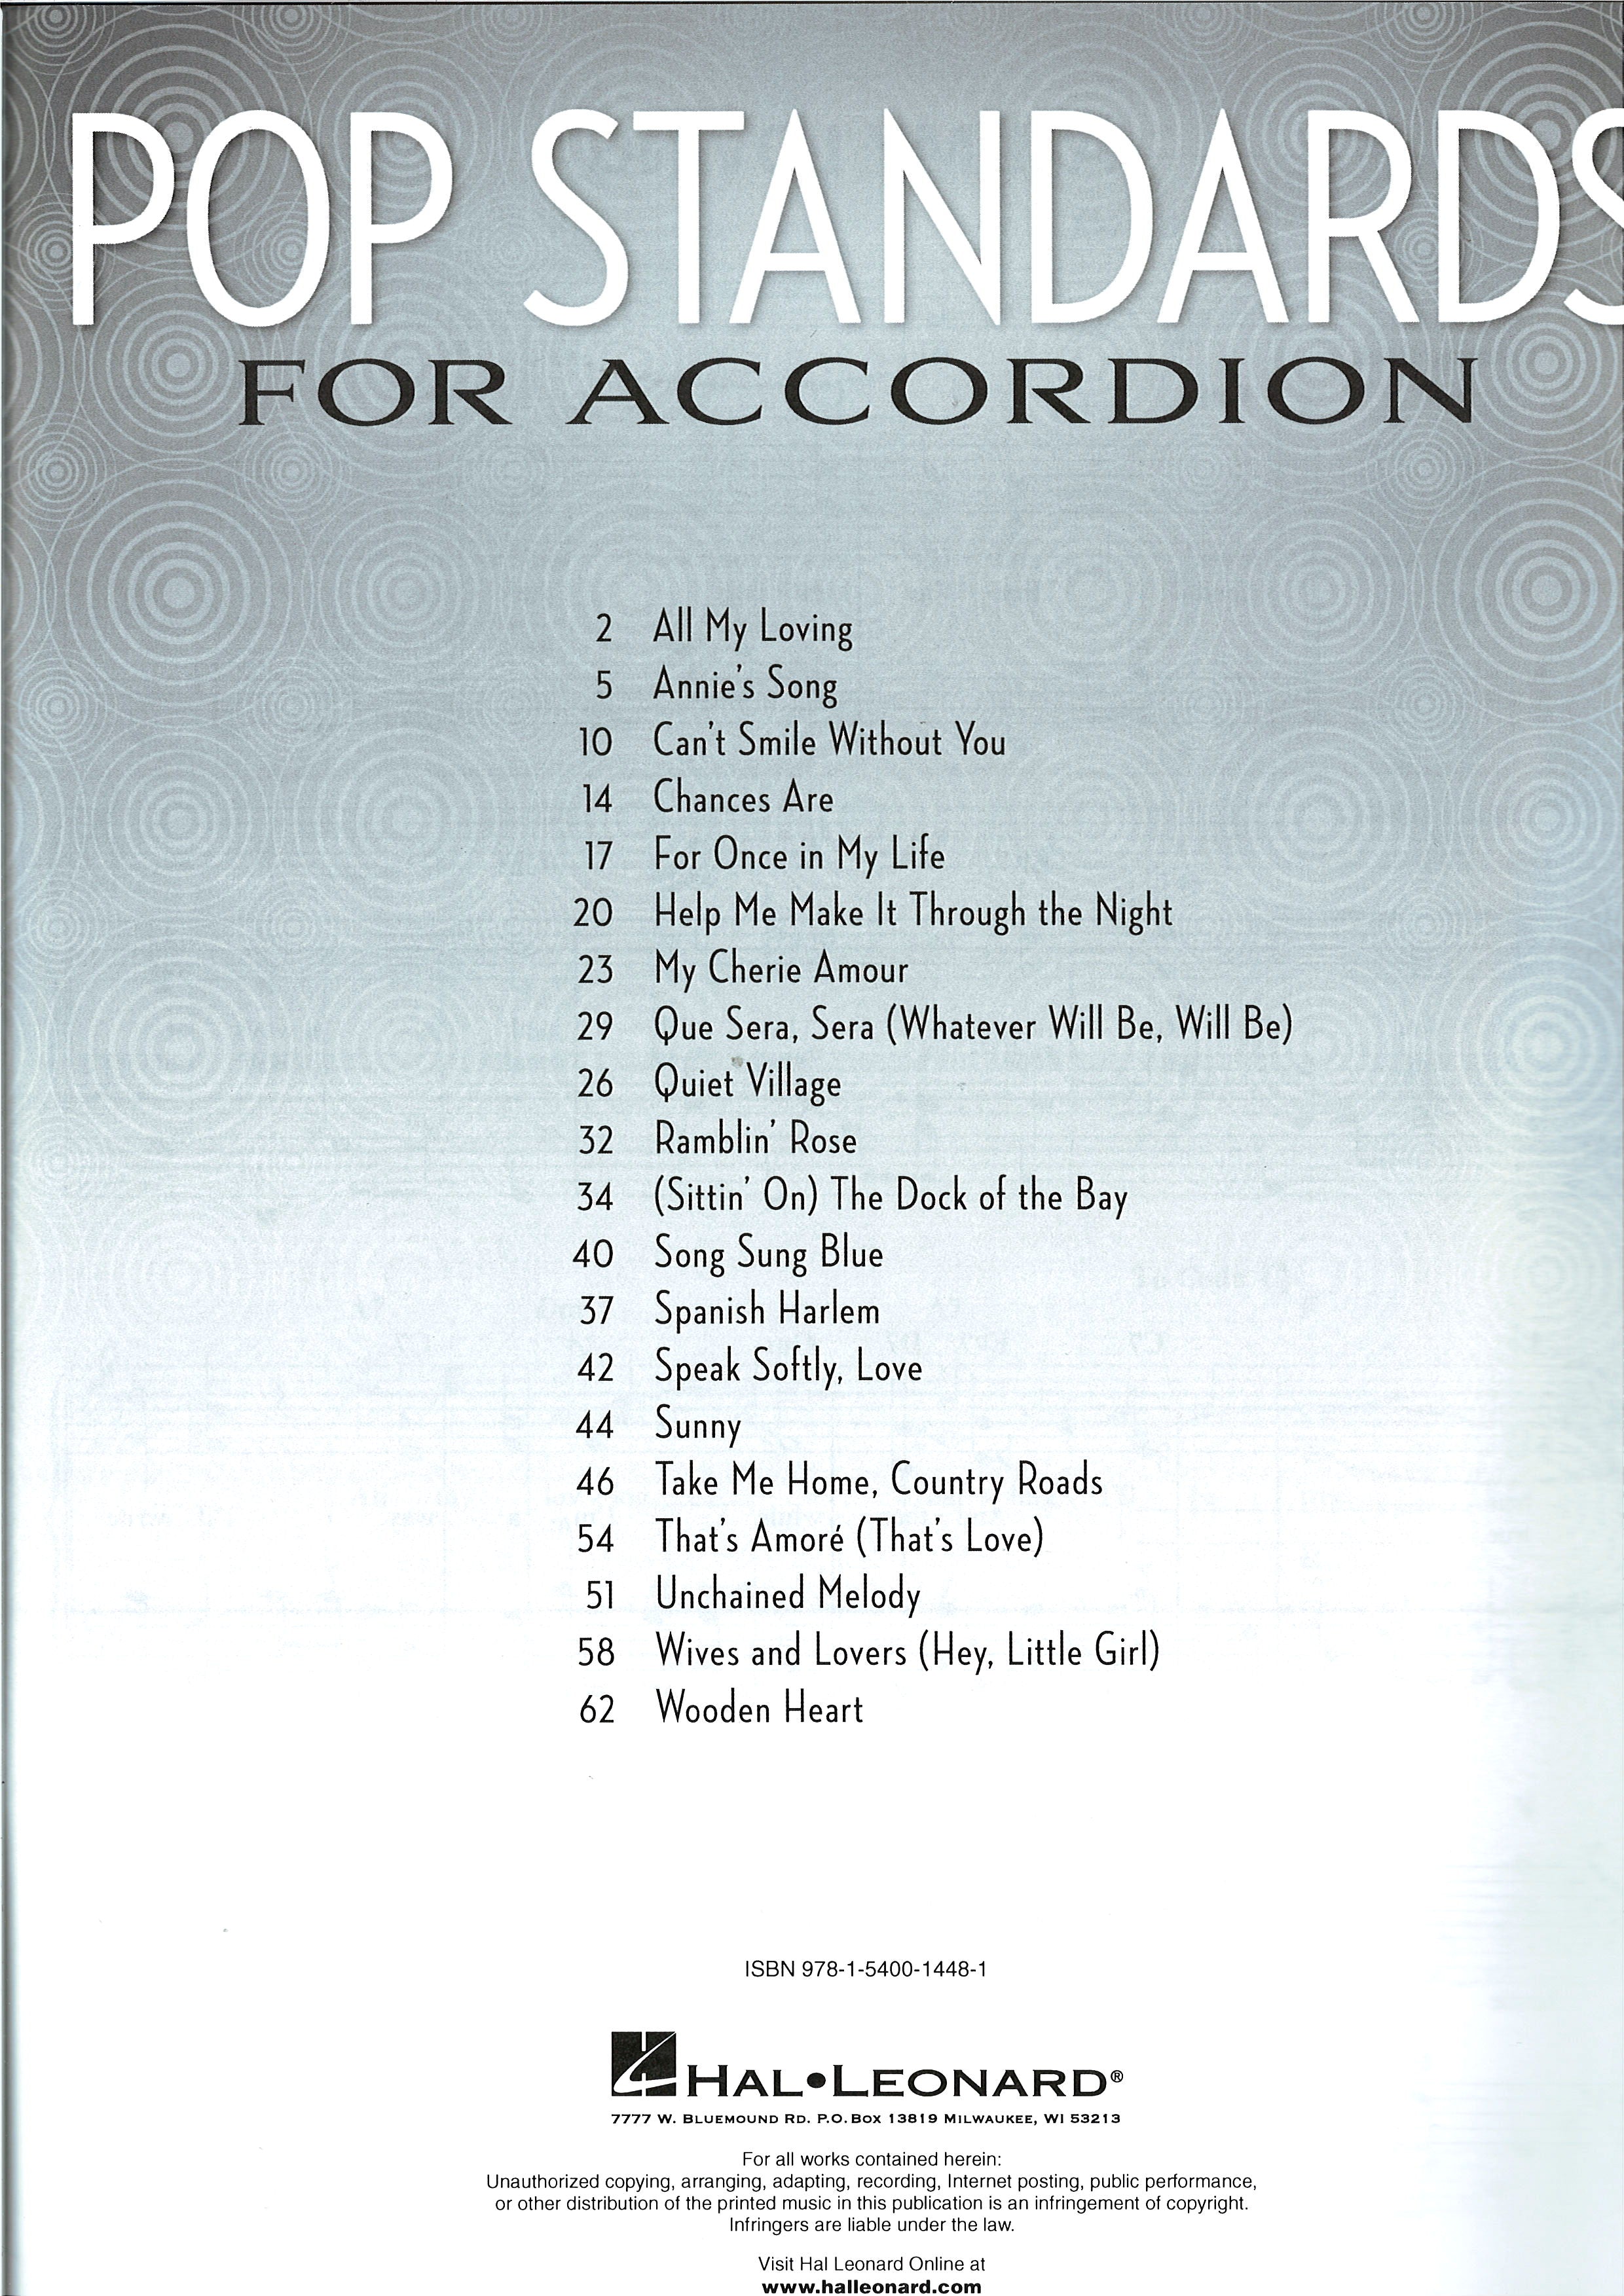 Pop Standards for Accordion